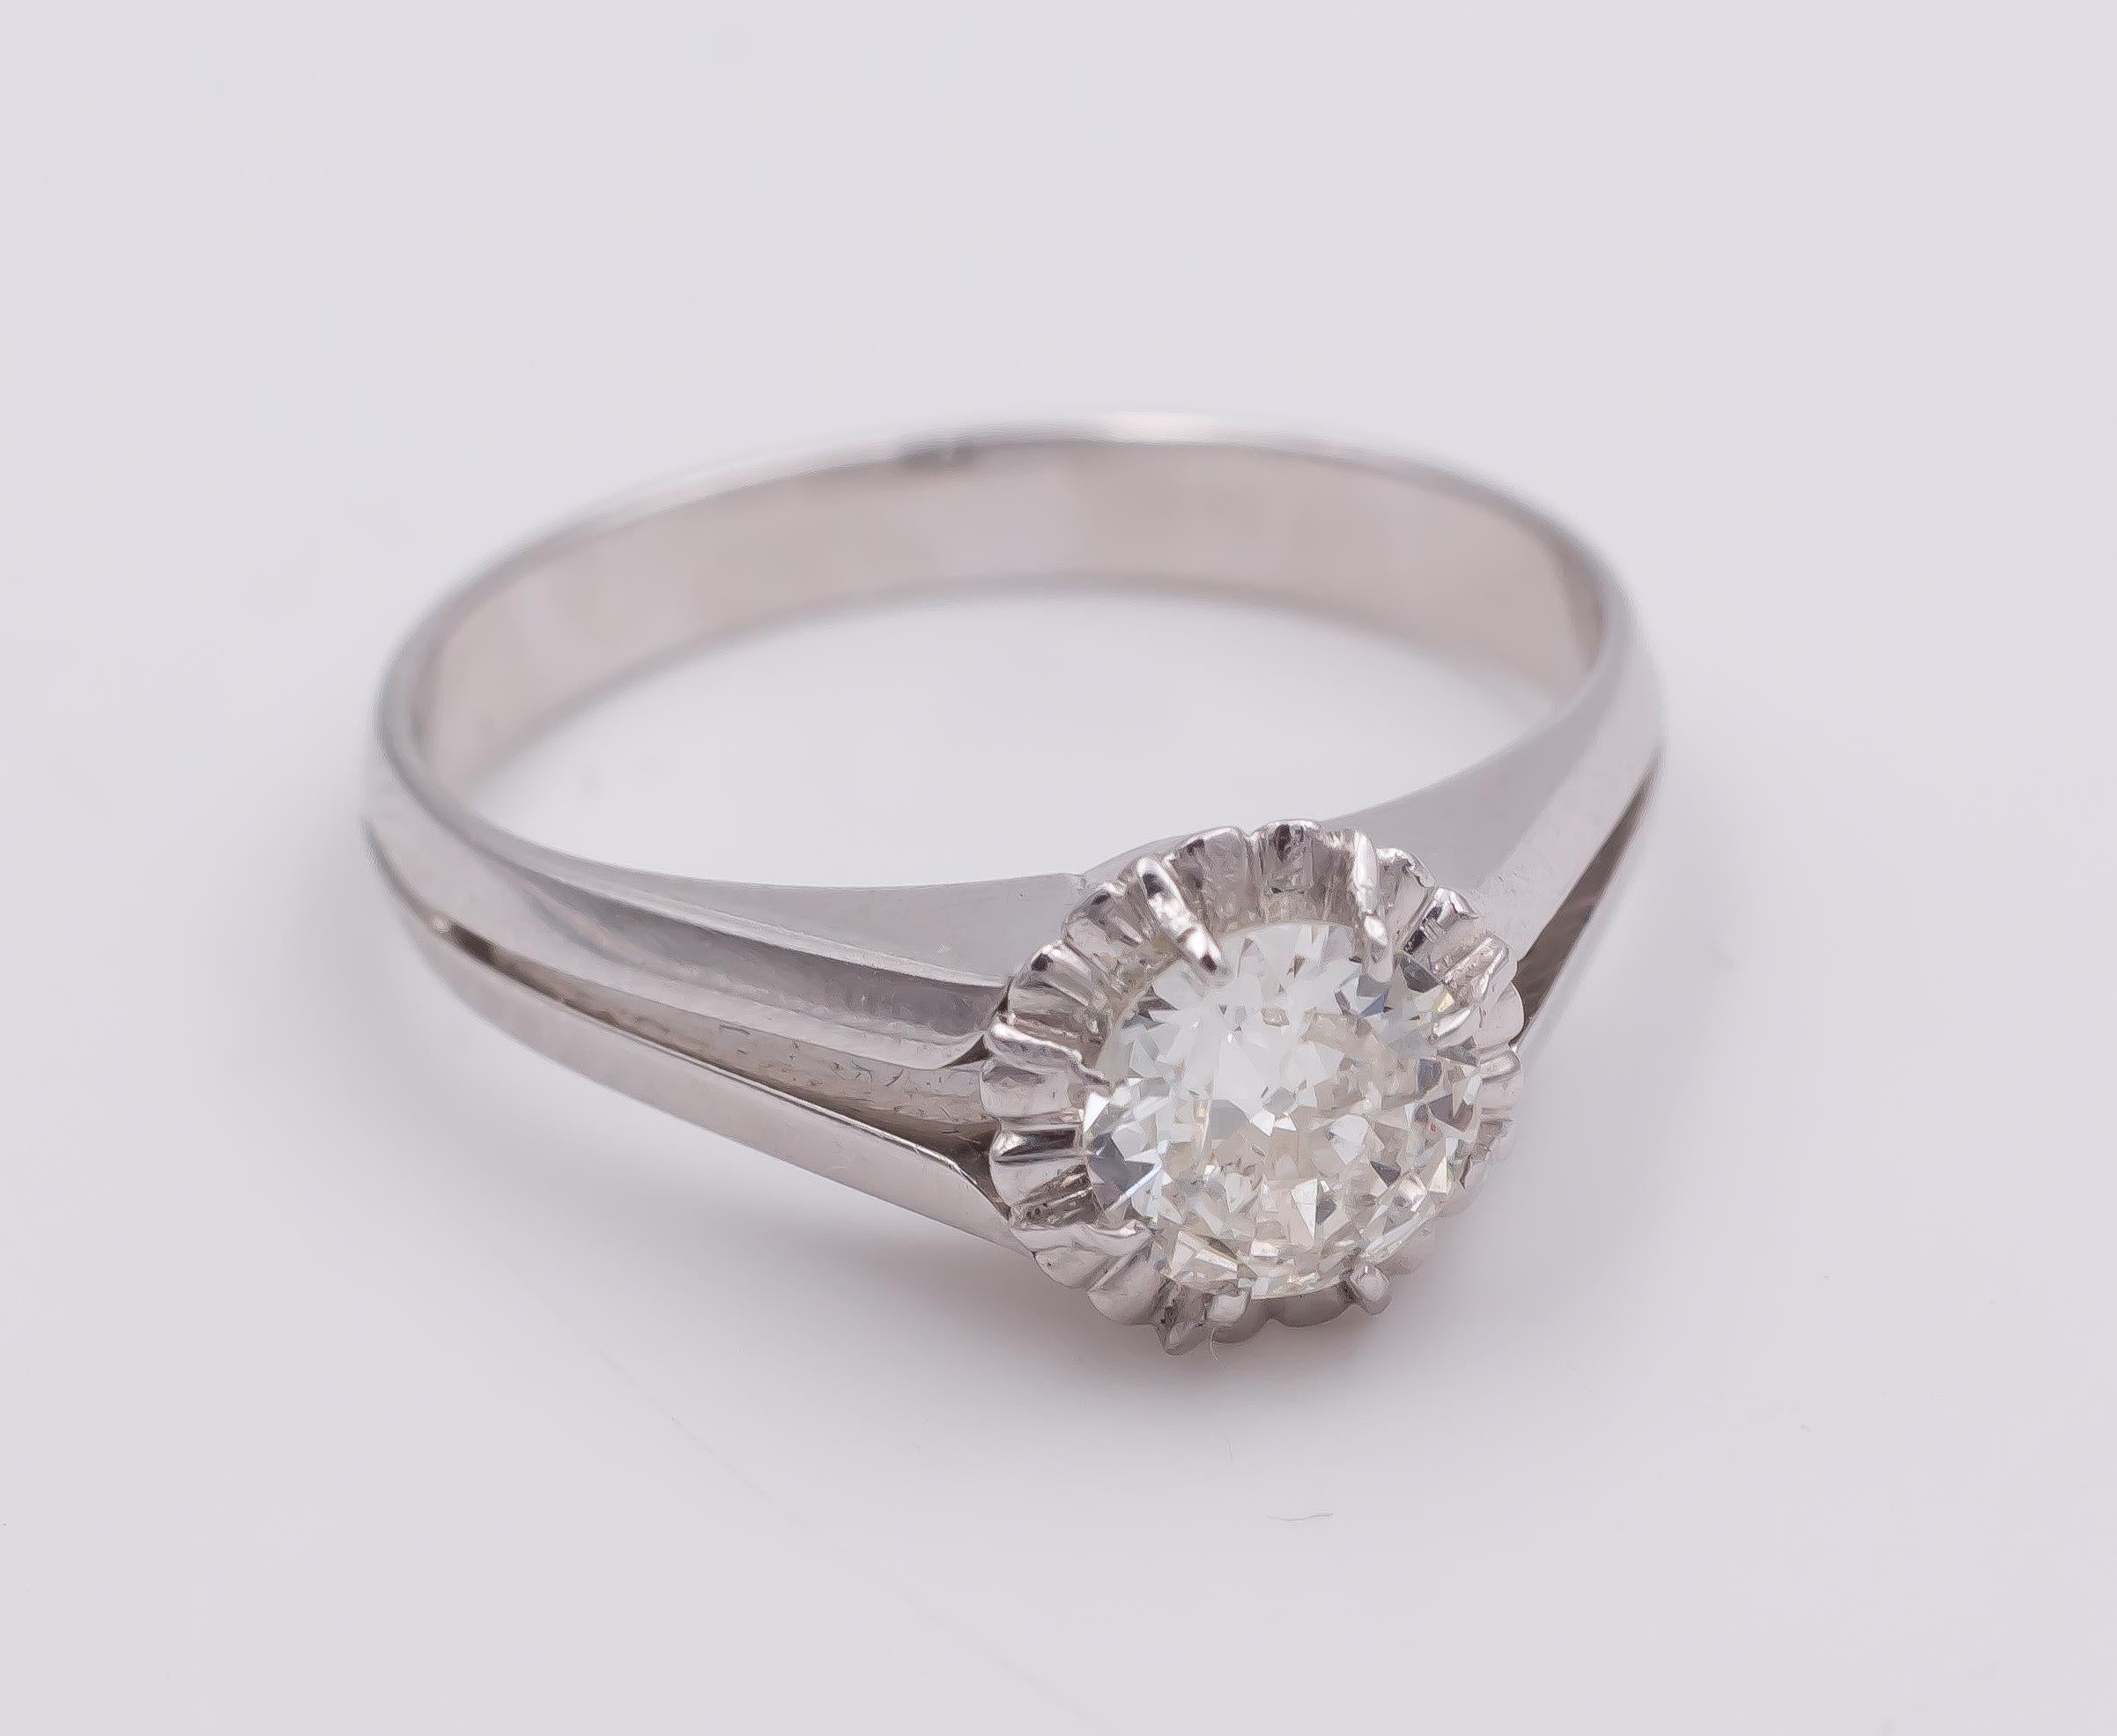 This vintage solitaire ring is set with a central 0.5ct round cut diamond and it is crafted in 18K white gold throughout. 

MATERIALS
18K white gold and 0.5ct round cut diamond

RING SIZE
6½ US (resizable)